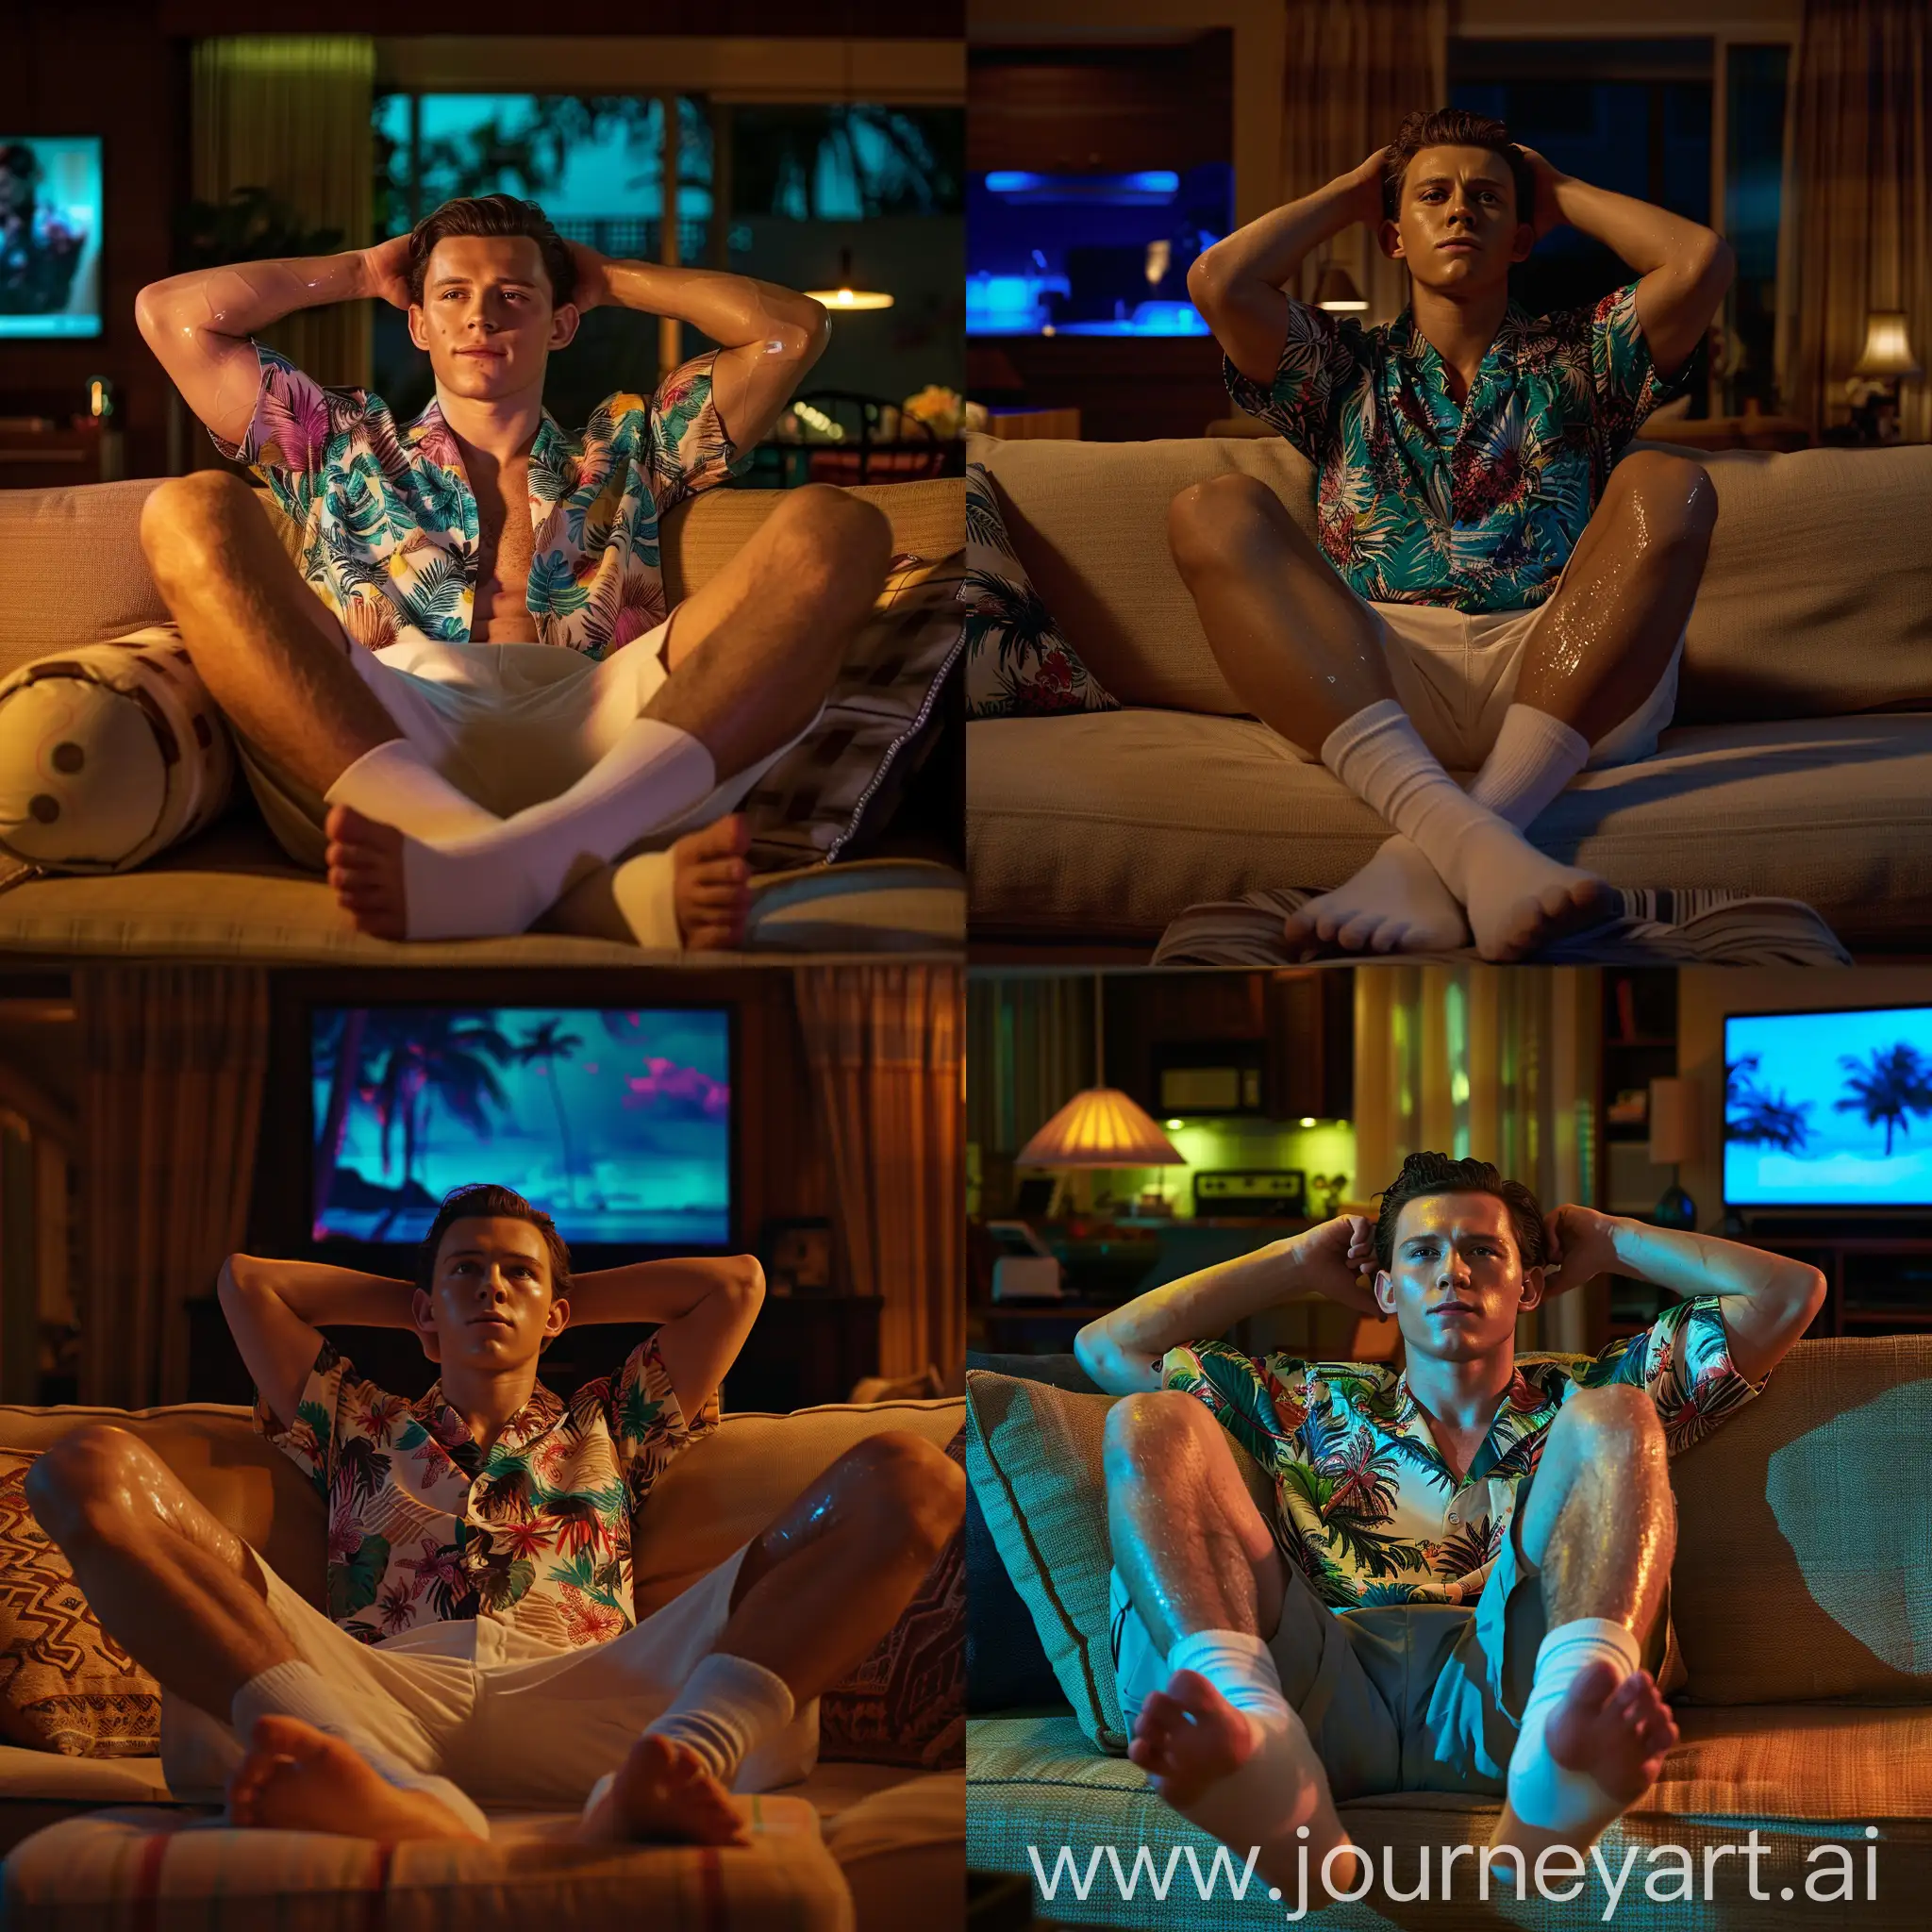 Handsome-Tom-Holland-Relaxing-in-Hawaiian-Shirt-in-Rich-Living-Room-at-Night